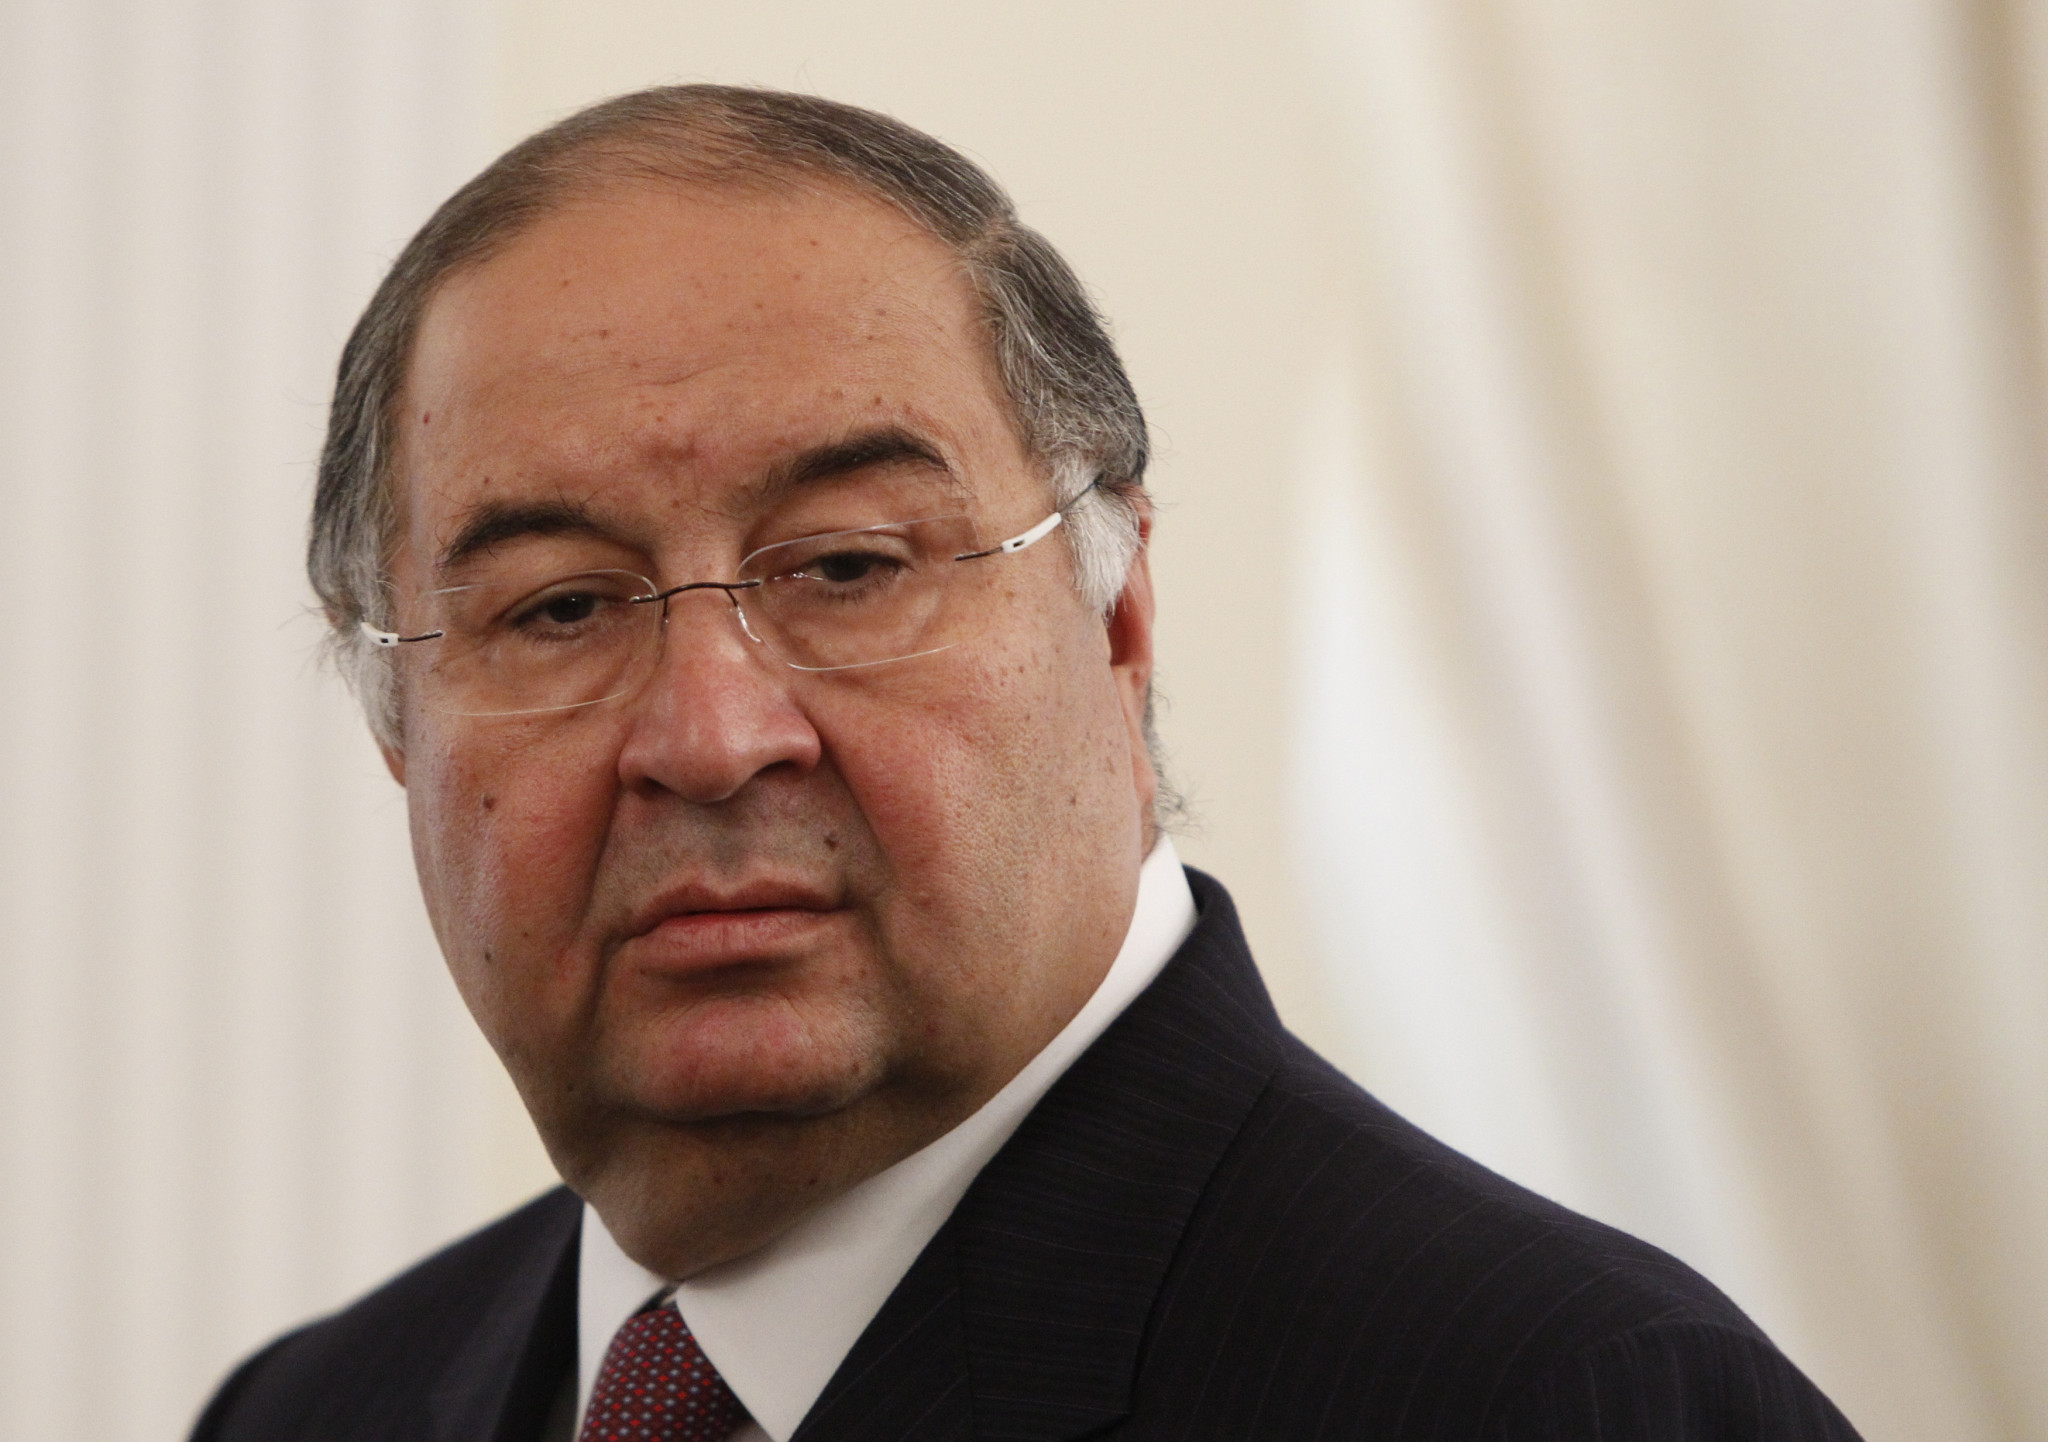 Alisher Usmanov has stood aside as FIE President following the imposition of EU sanctions ©Getty Images